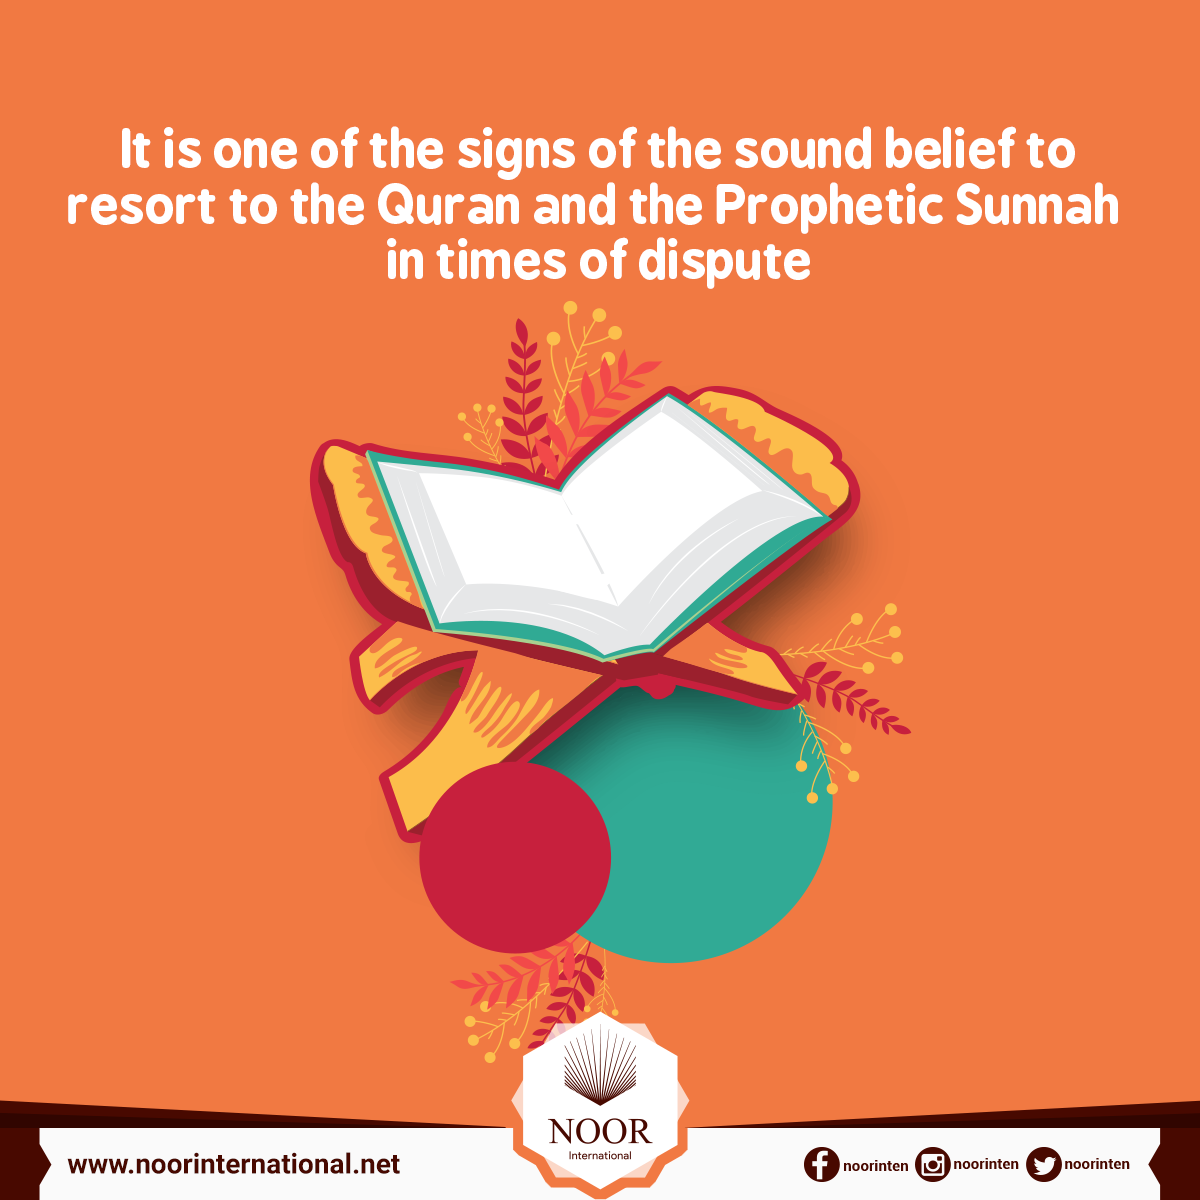 It is one of the signs of the sound belief to resort to the Quran and the Prophetic Sunnah in times of dispute